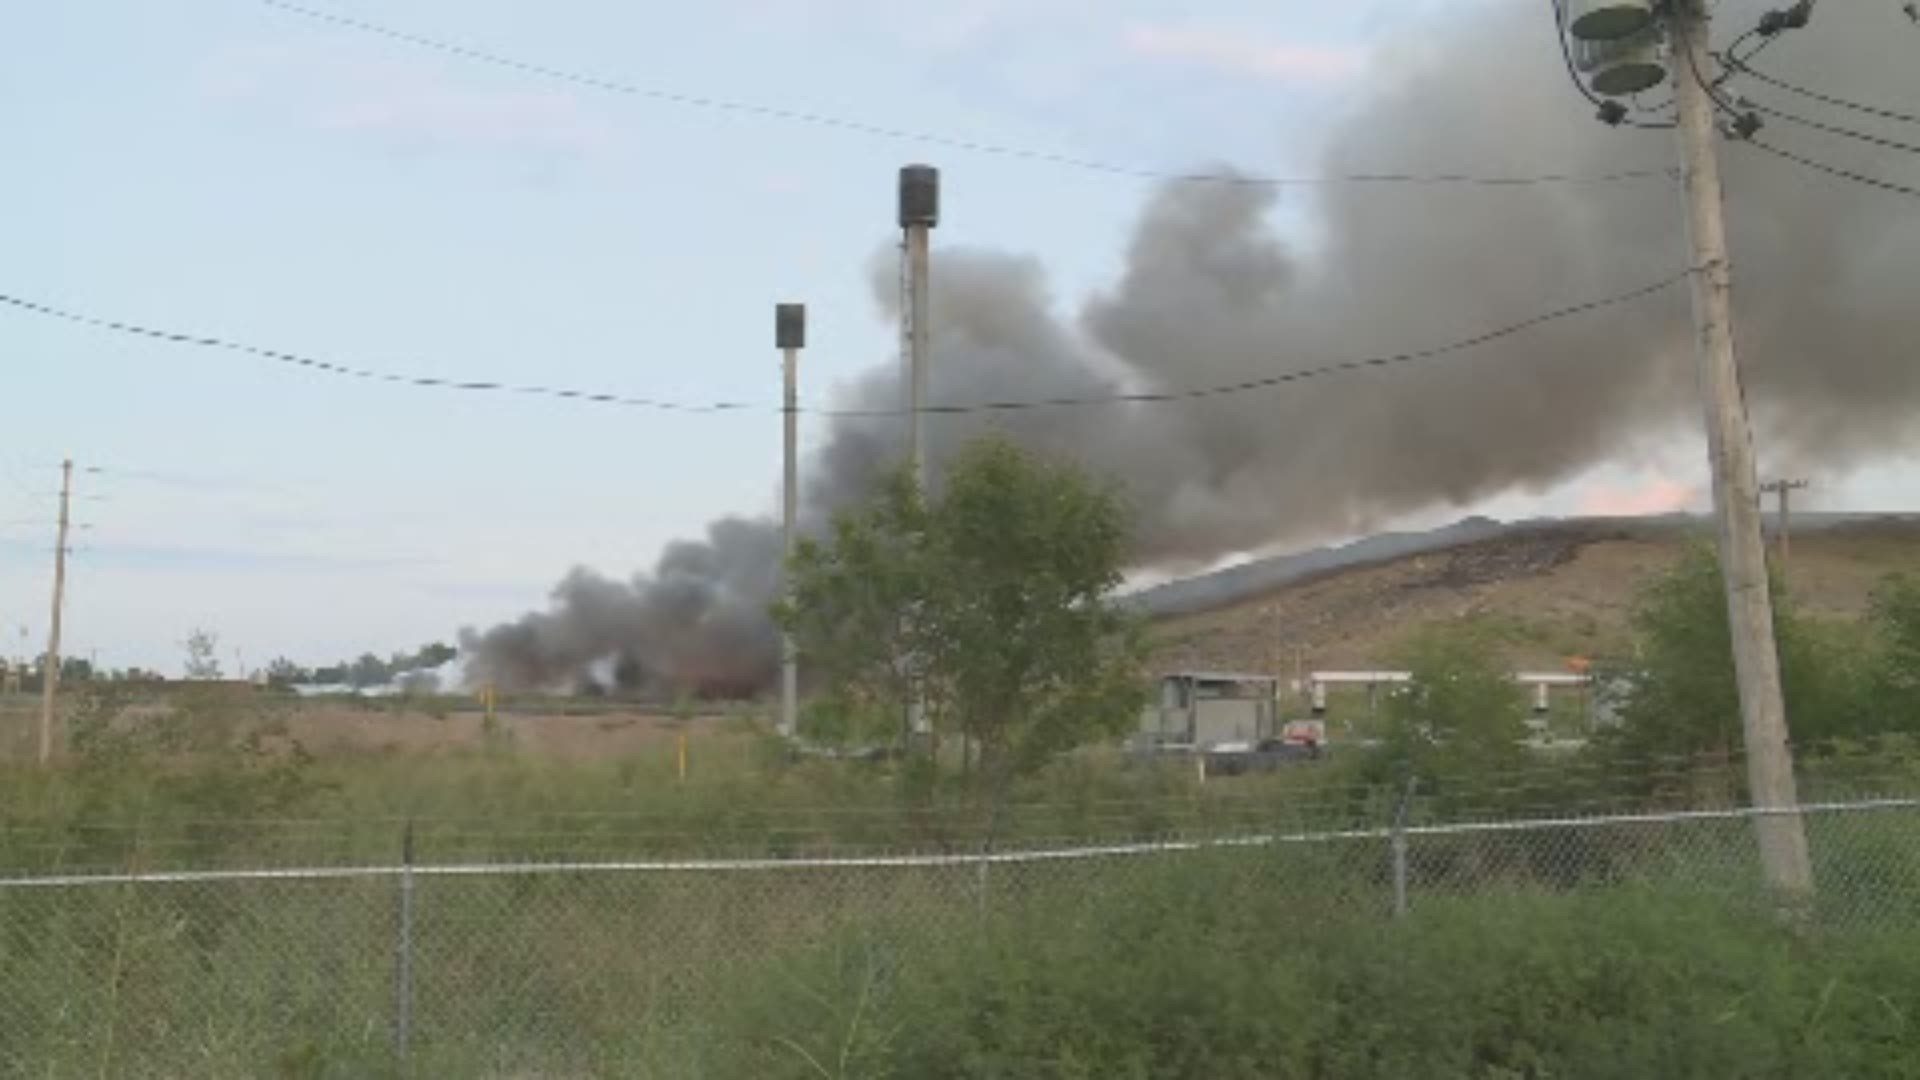 Police are investigating a fire that happened at the Waste Management site last Sunday.